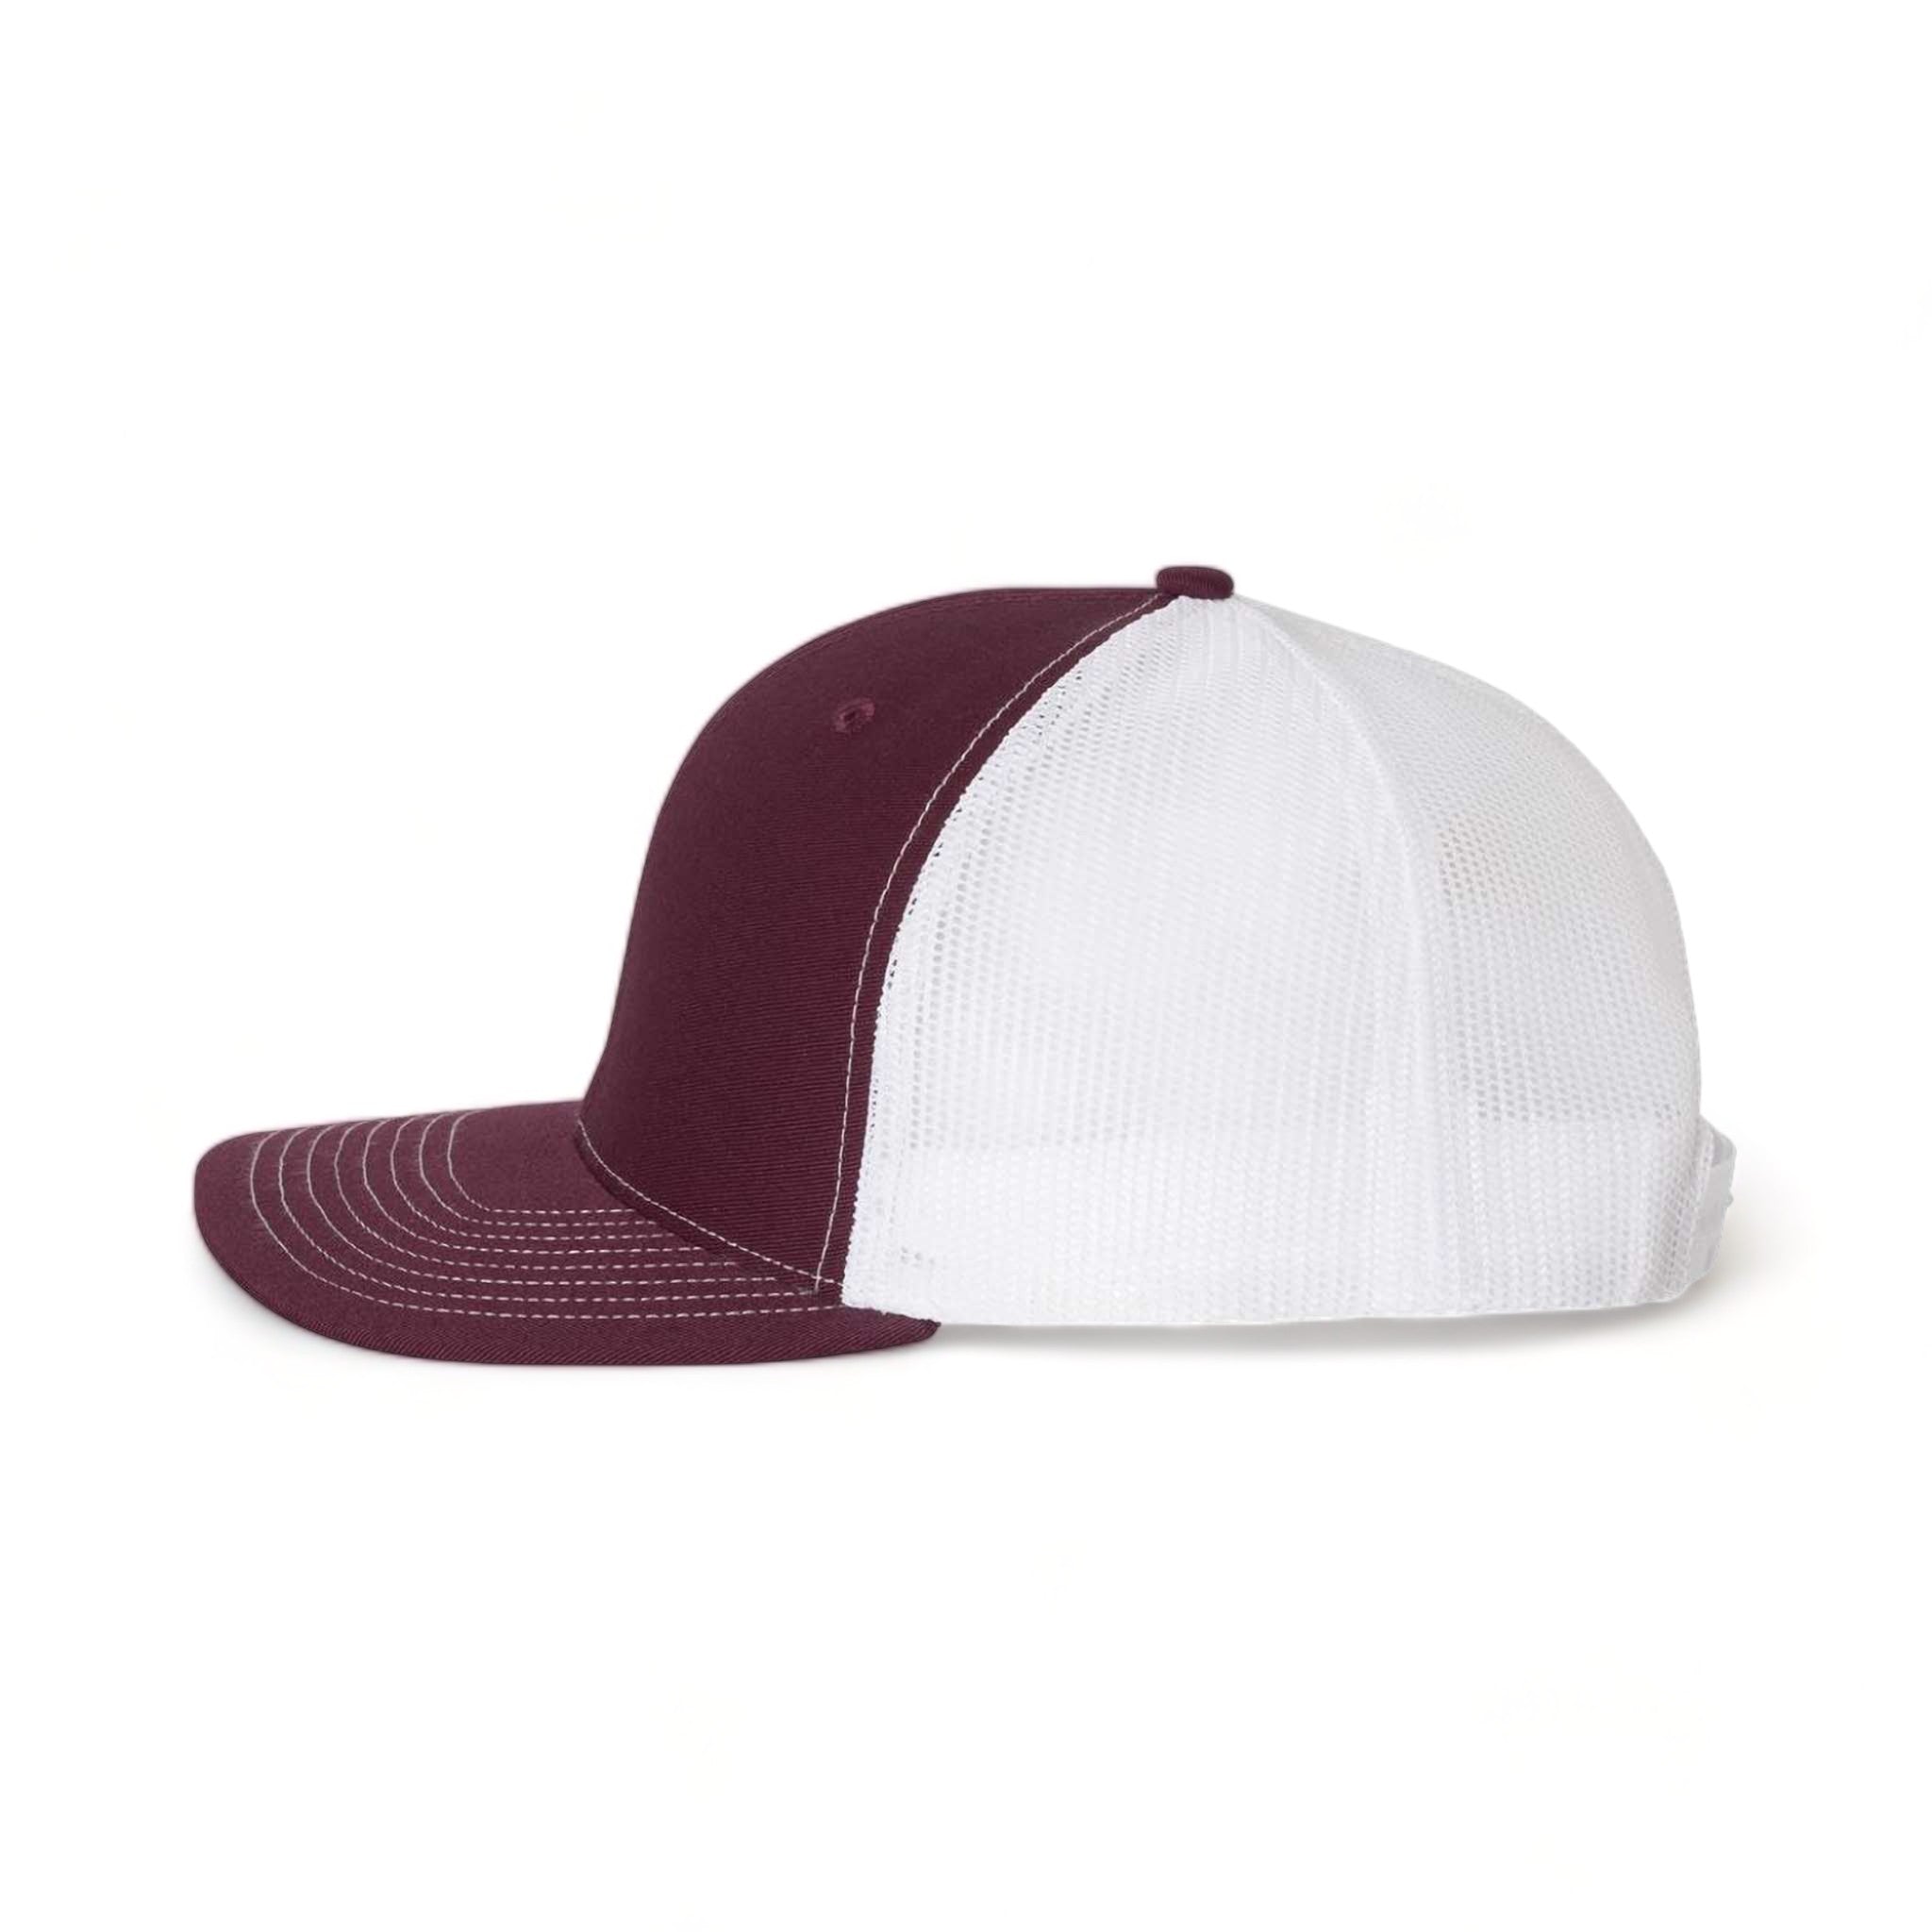 Side view of Richardson 112 custom hat in maroon and white